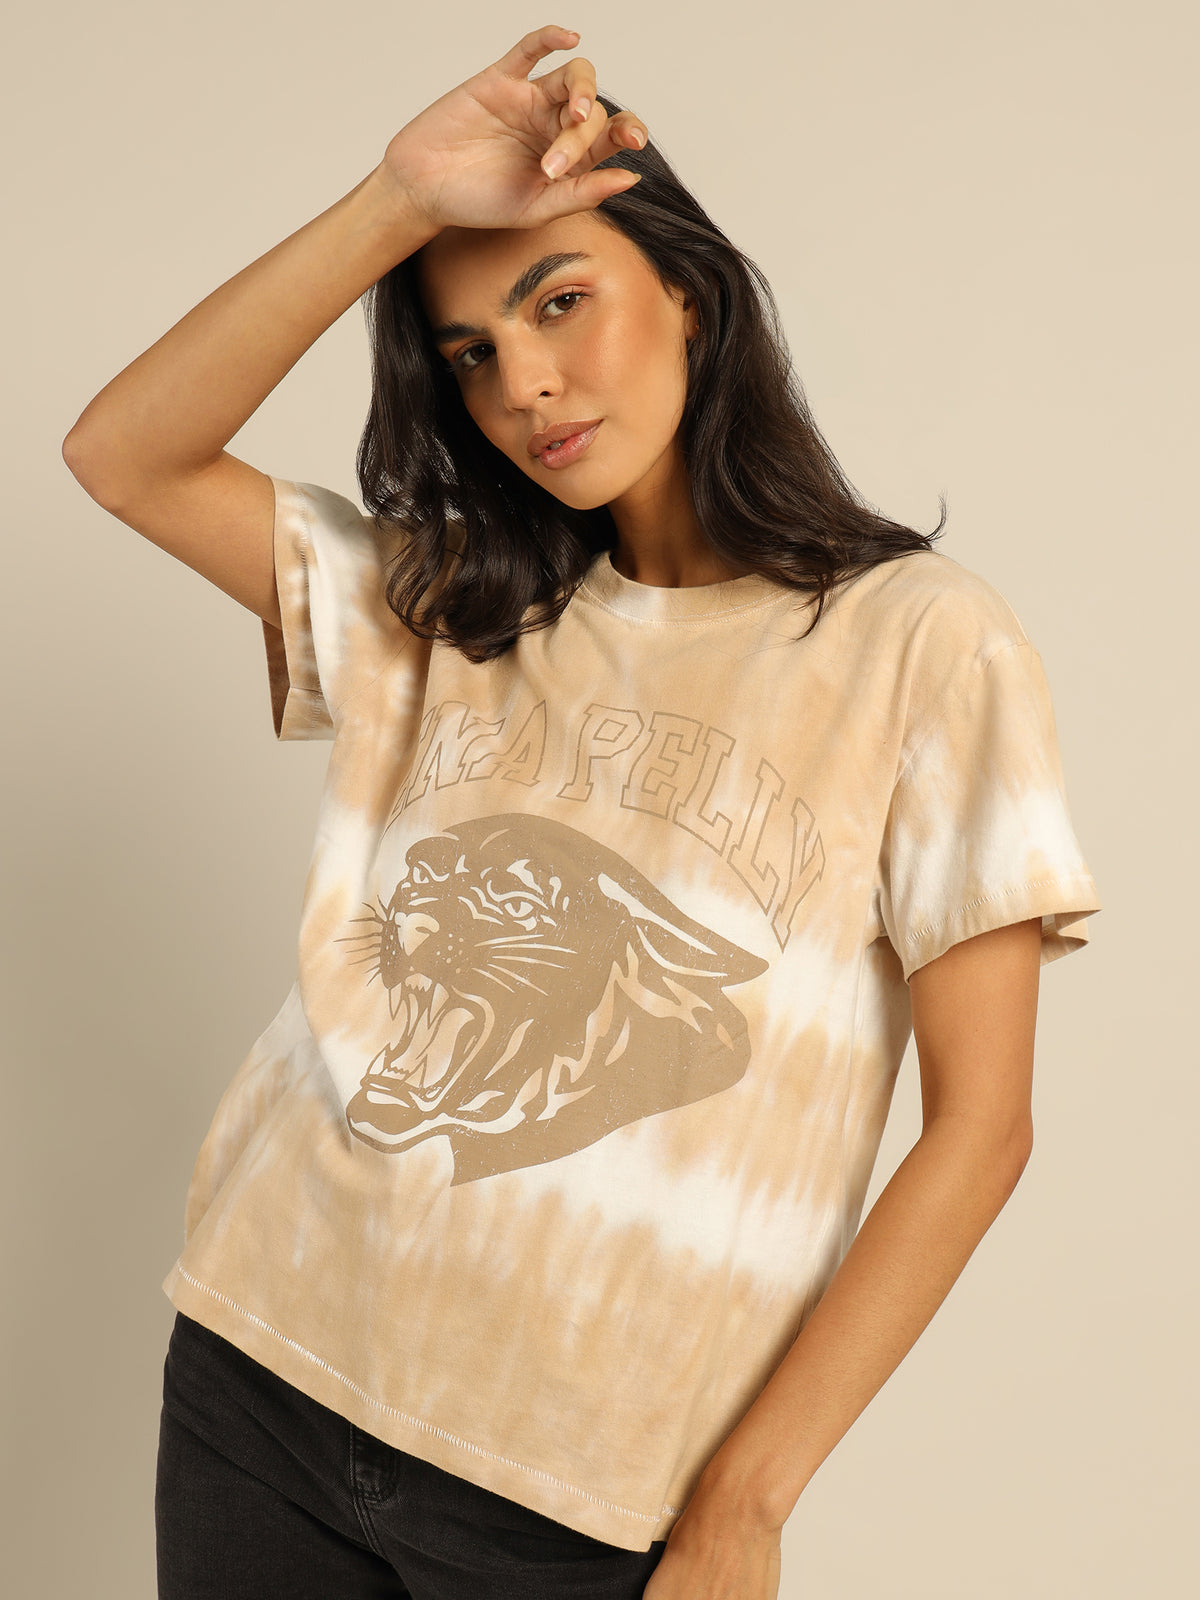 Panther Collegiate T-Shirt in Ginger Tie Dye